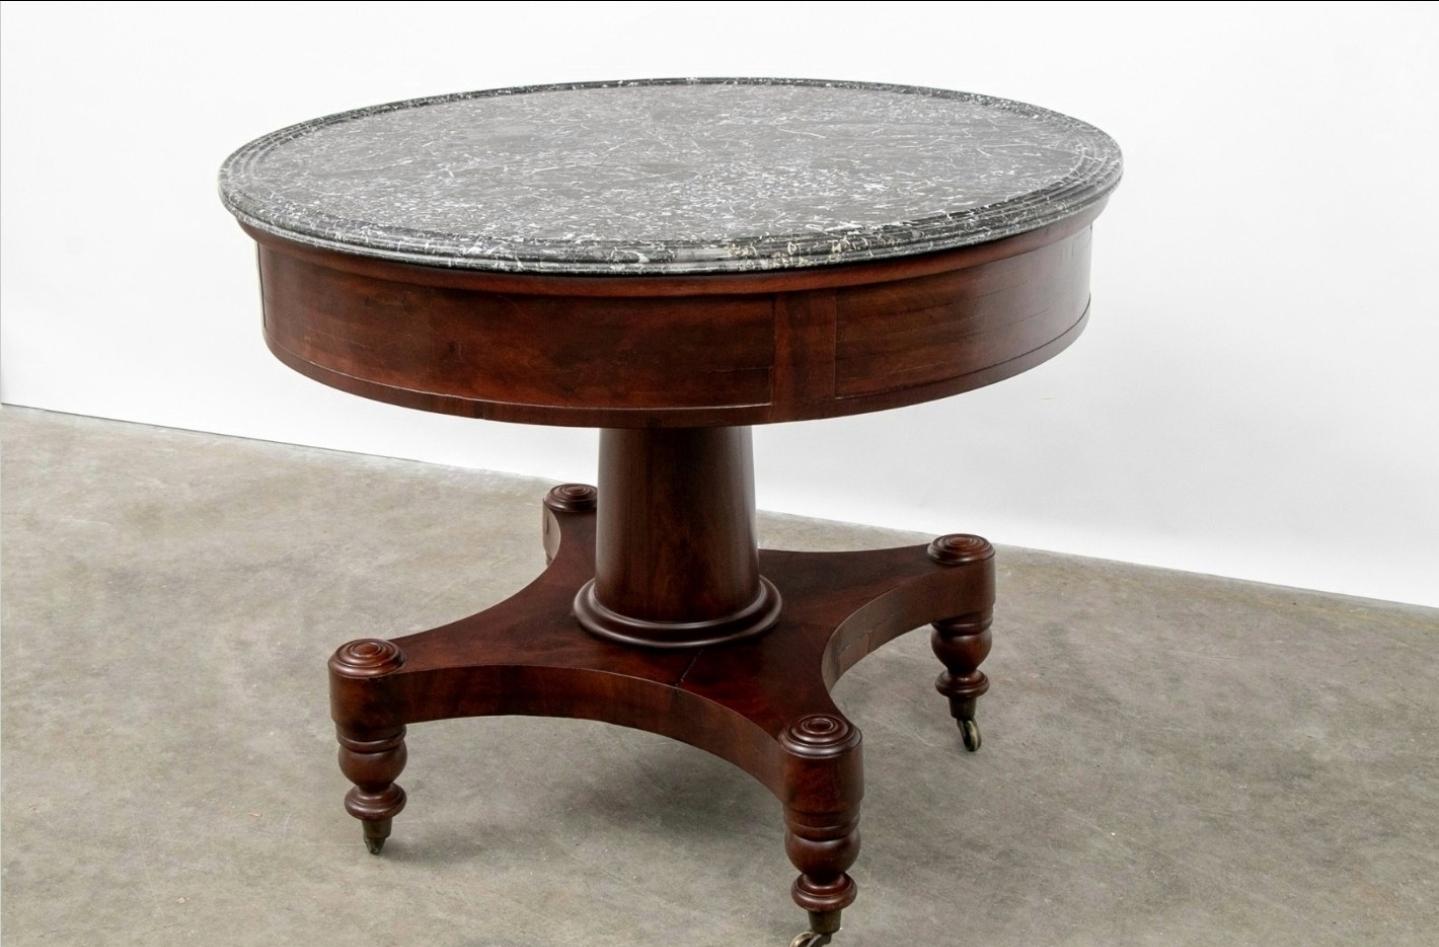 A fine 200 year old American Federal period Boston Classical mahogany pedestal center table. circa 1825

Exquisitely hand-crafted in the Northeastern United States in the early 19th century, having a graduated column pedestal surmounted on a